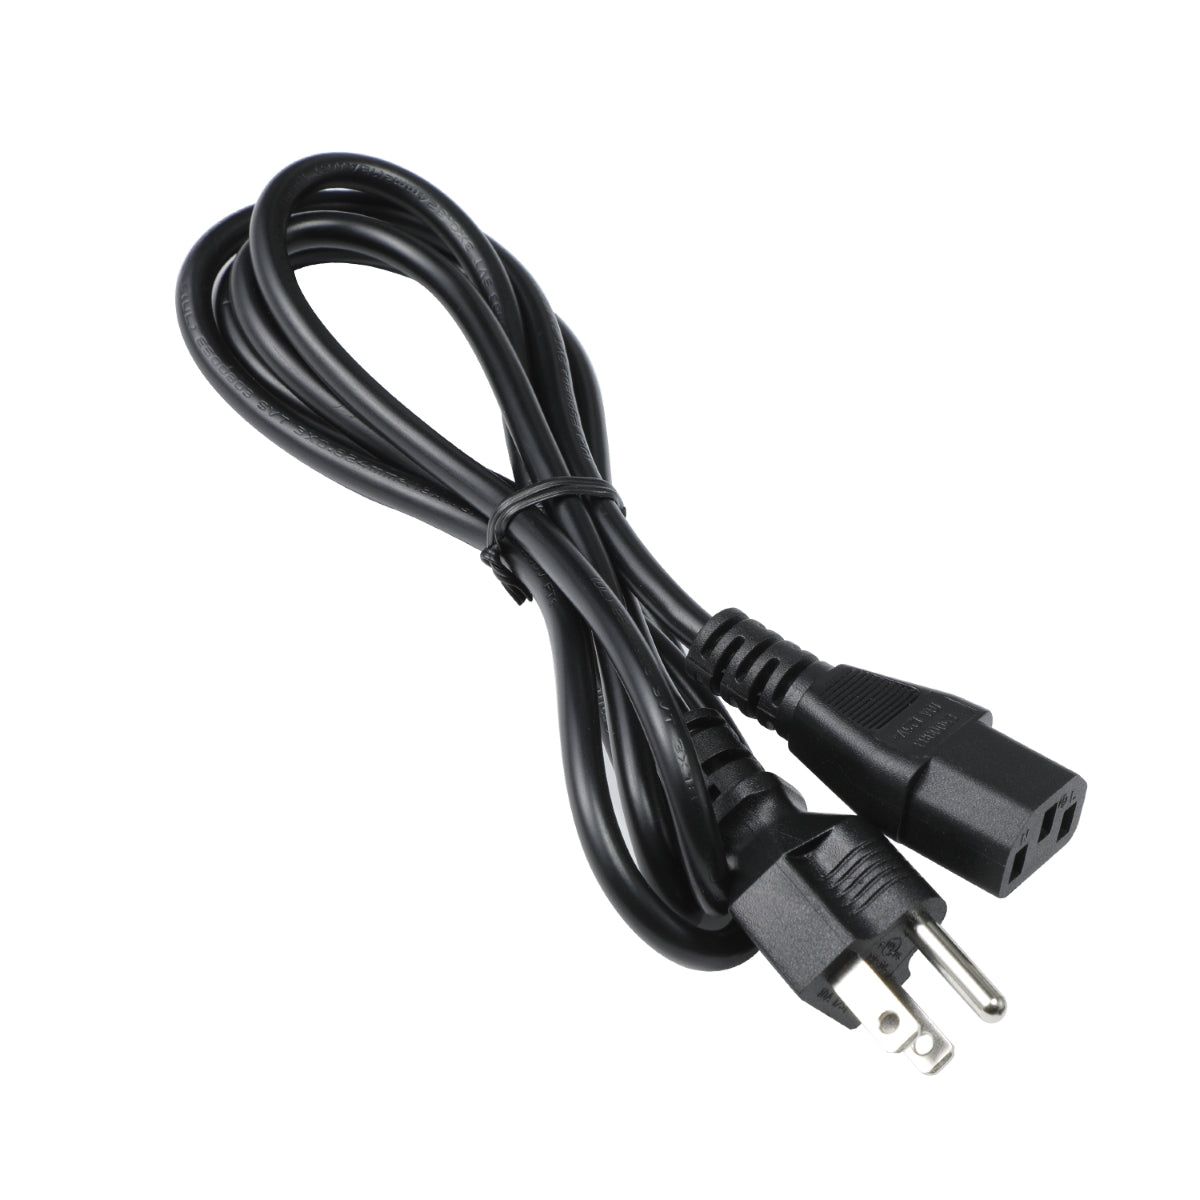 Power Cord for Dell P2219H Monitor.